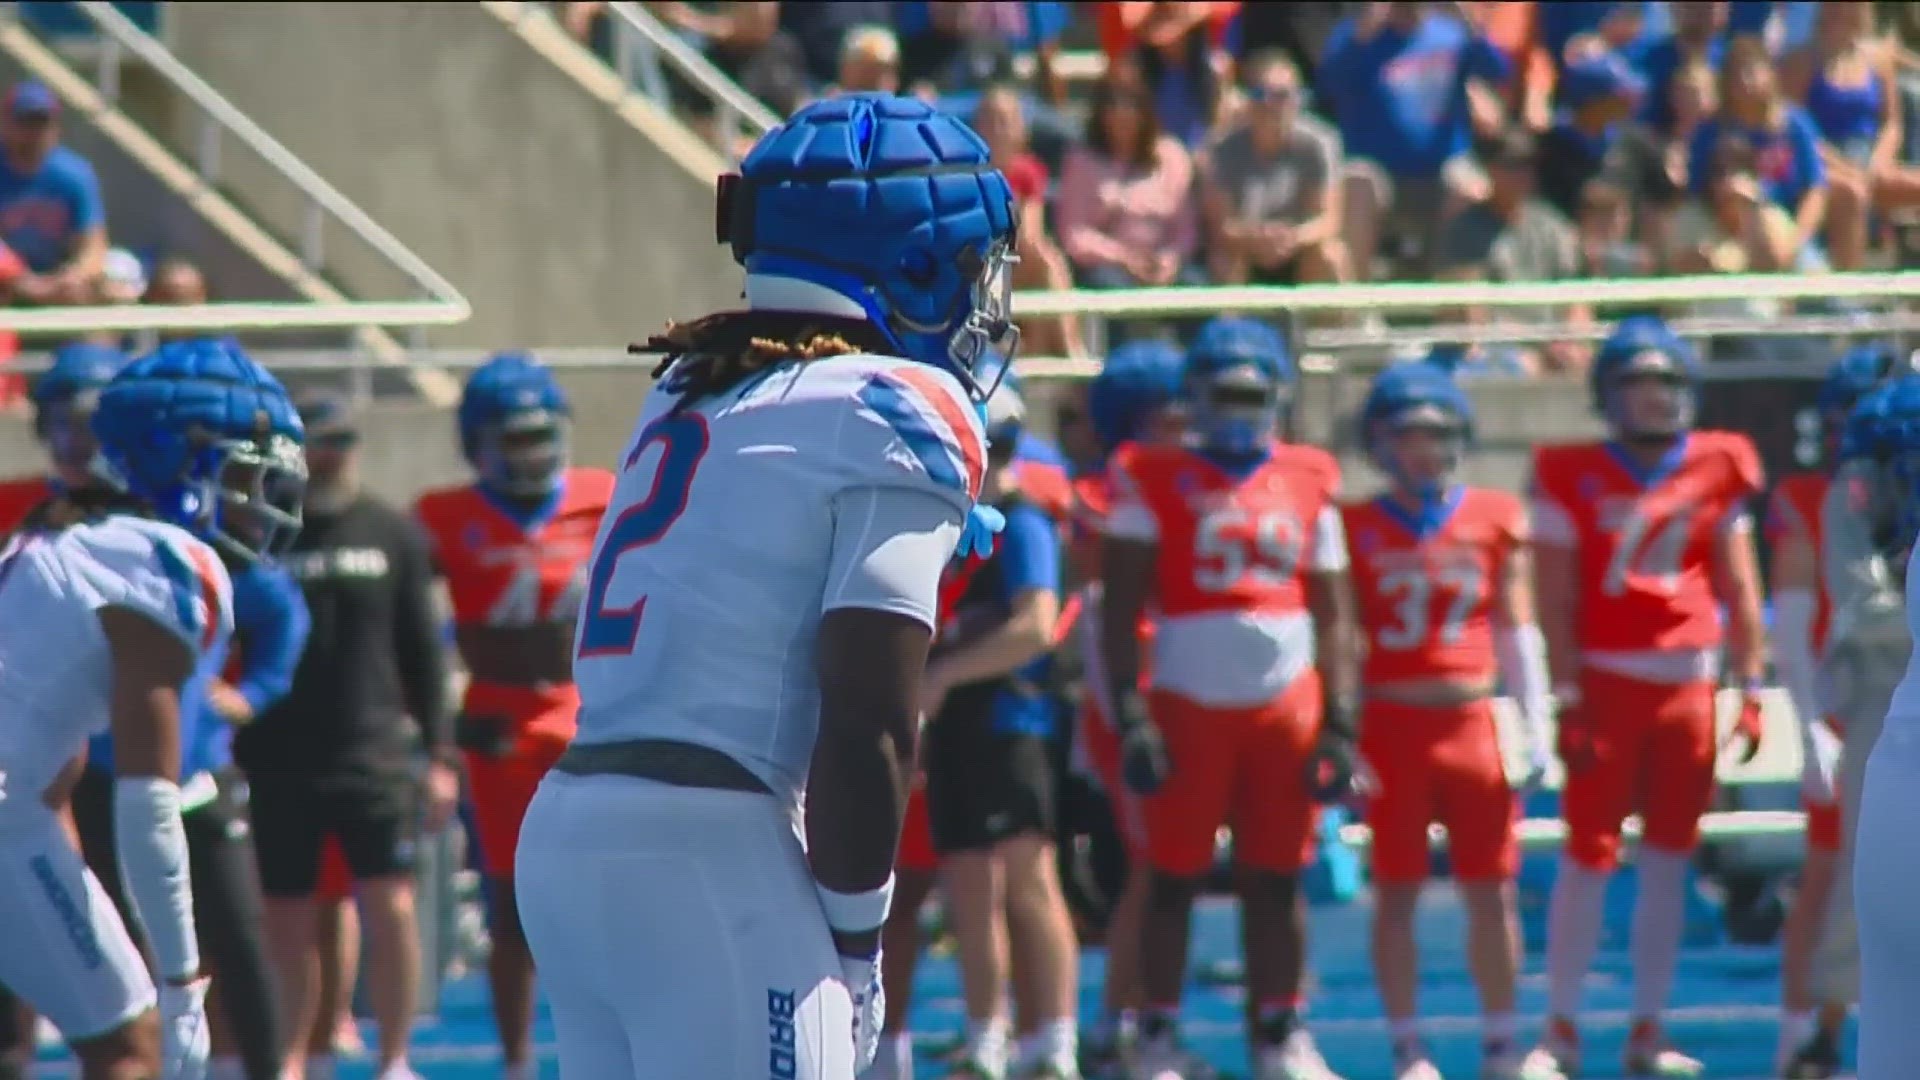 Saturday's crowd more than doubled last year's Boise State spring game. Malachi Nelson threw for 137 yards and a touchdown, while the defense racked up five sacks.